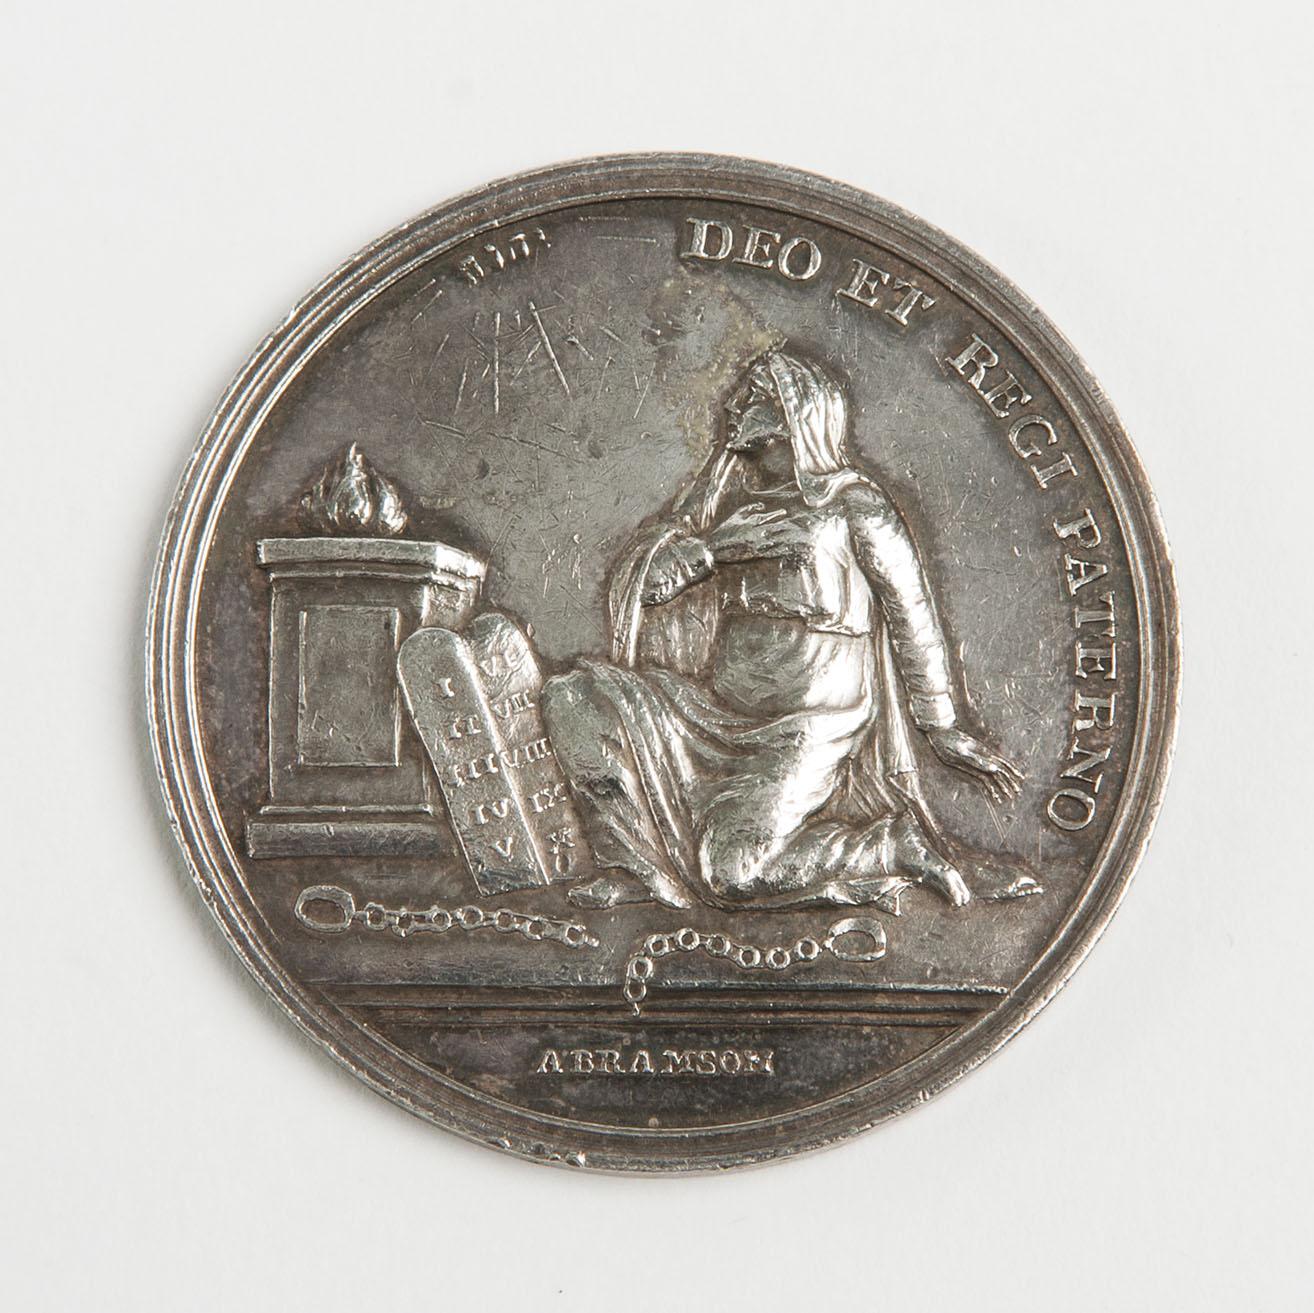 Medal featuring seated person next to Hebrew tablets and Latin text around.